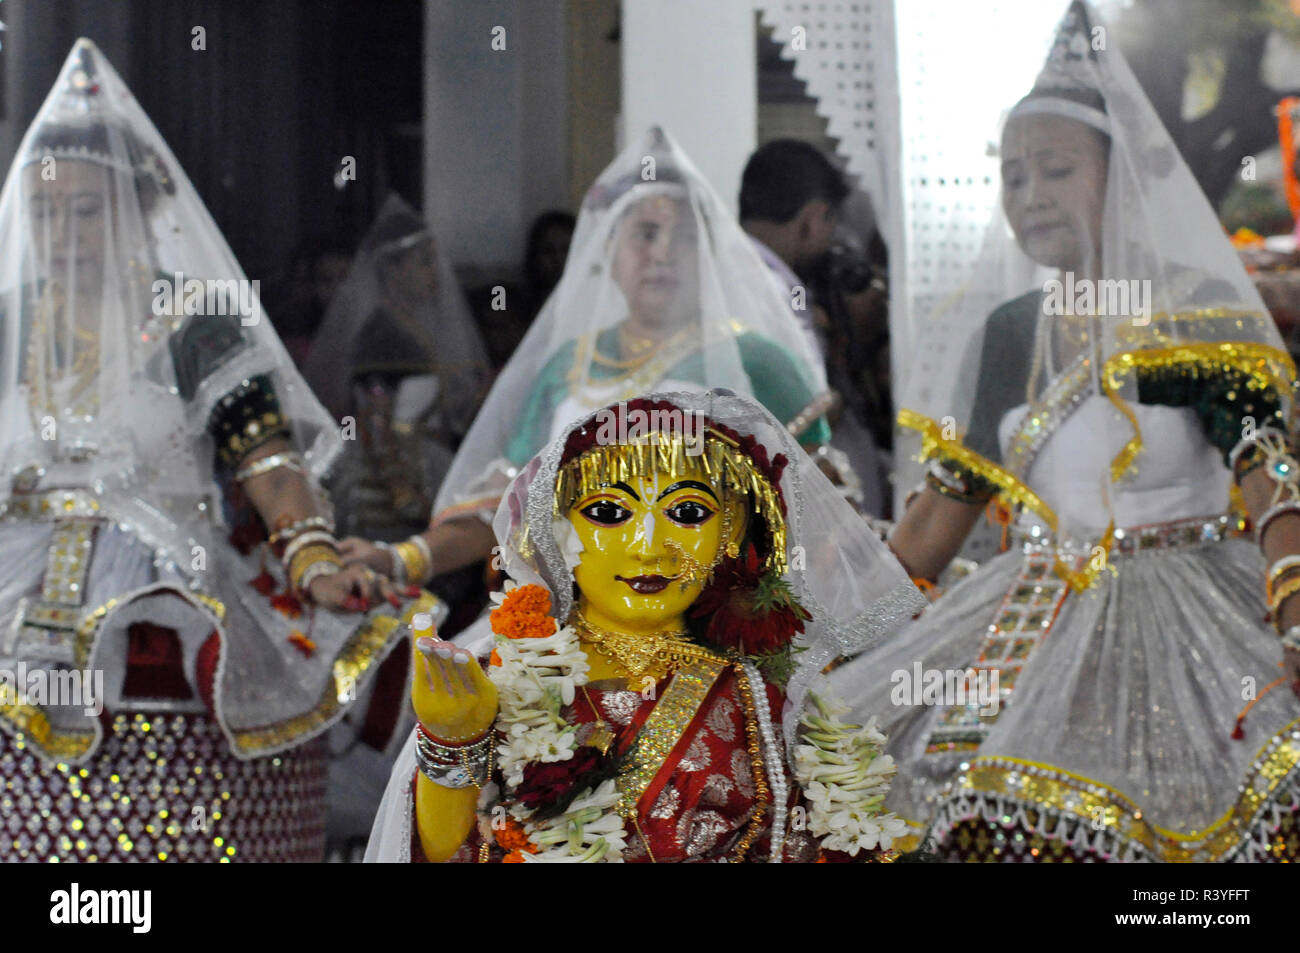 Dancers seen performing with an idol the traditional dance in RASH PURNIMA with their heads covered by veils during the birthday celebration of Shri Mahaprabhu on the Phalguni Purnima (i.e. on the Full moon day). Many devotees from around the world make a pilgrimage on the auspicious occasion. Stock Photo